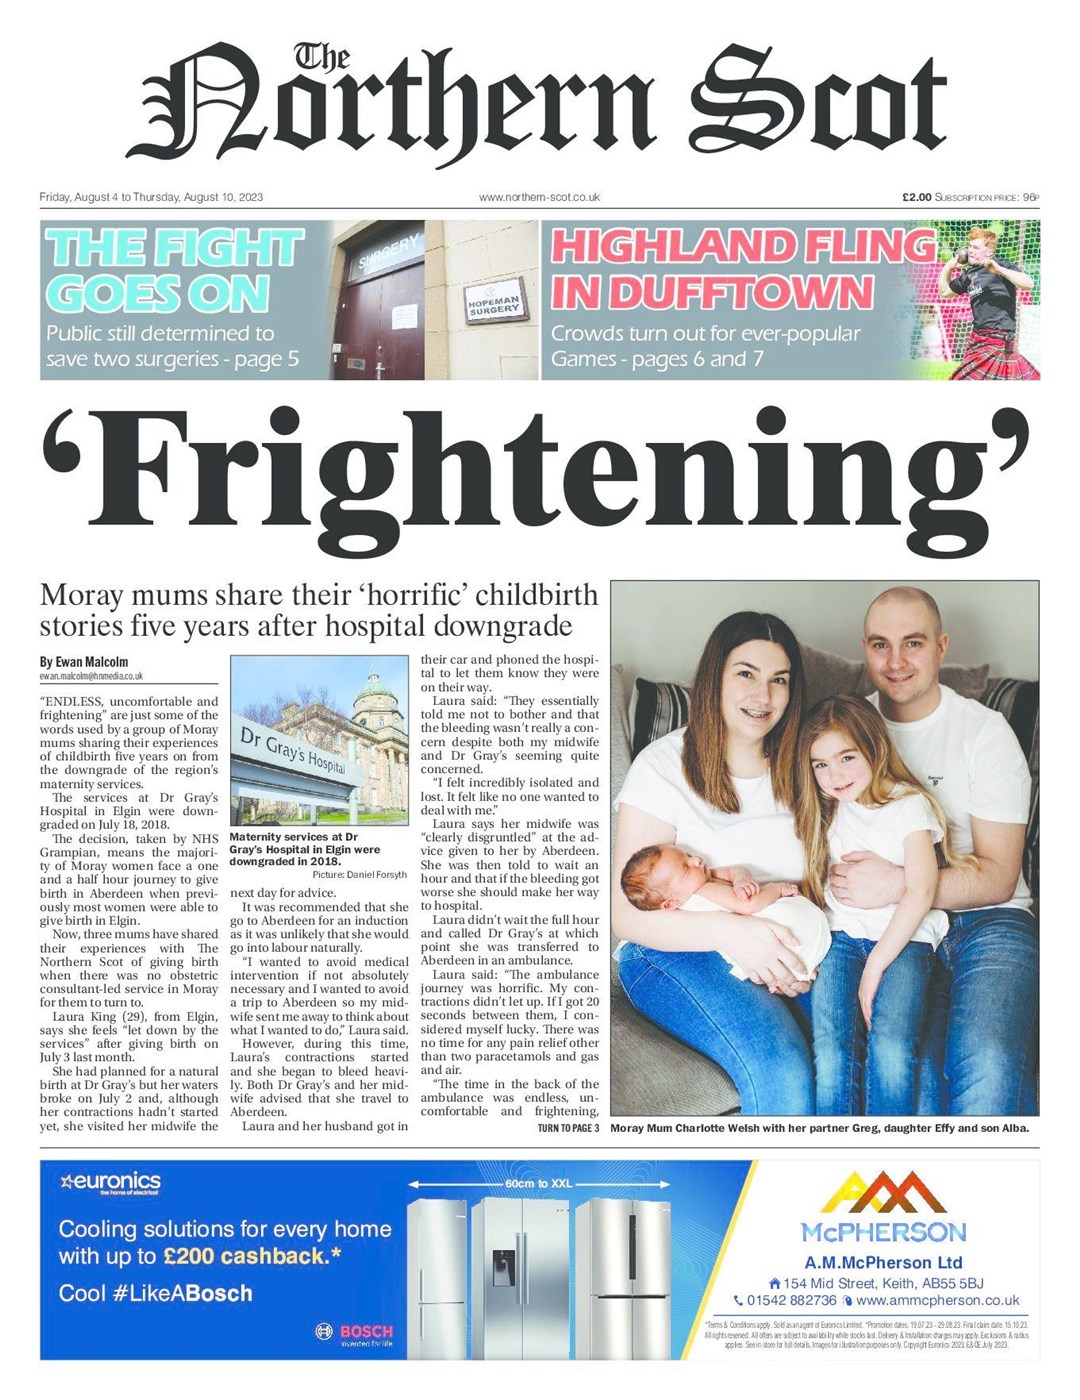 Some of our work highlighting the continued plight of Moray mums as a result of the downgrade is now being showcased alongside other powerful campaigns from across the UK.